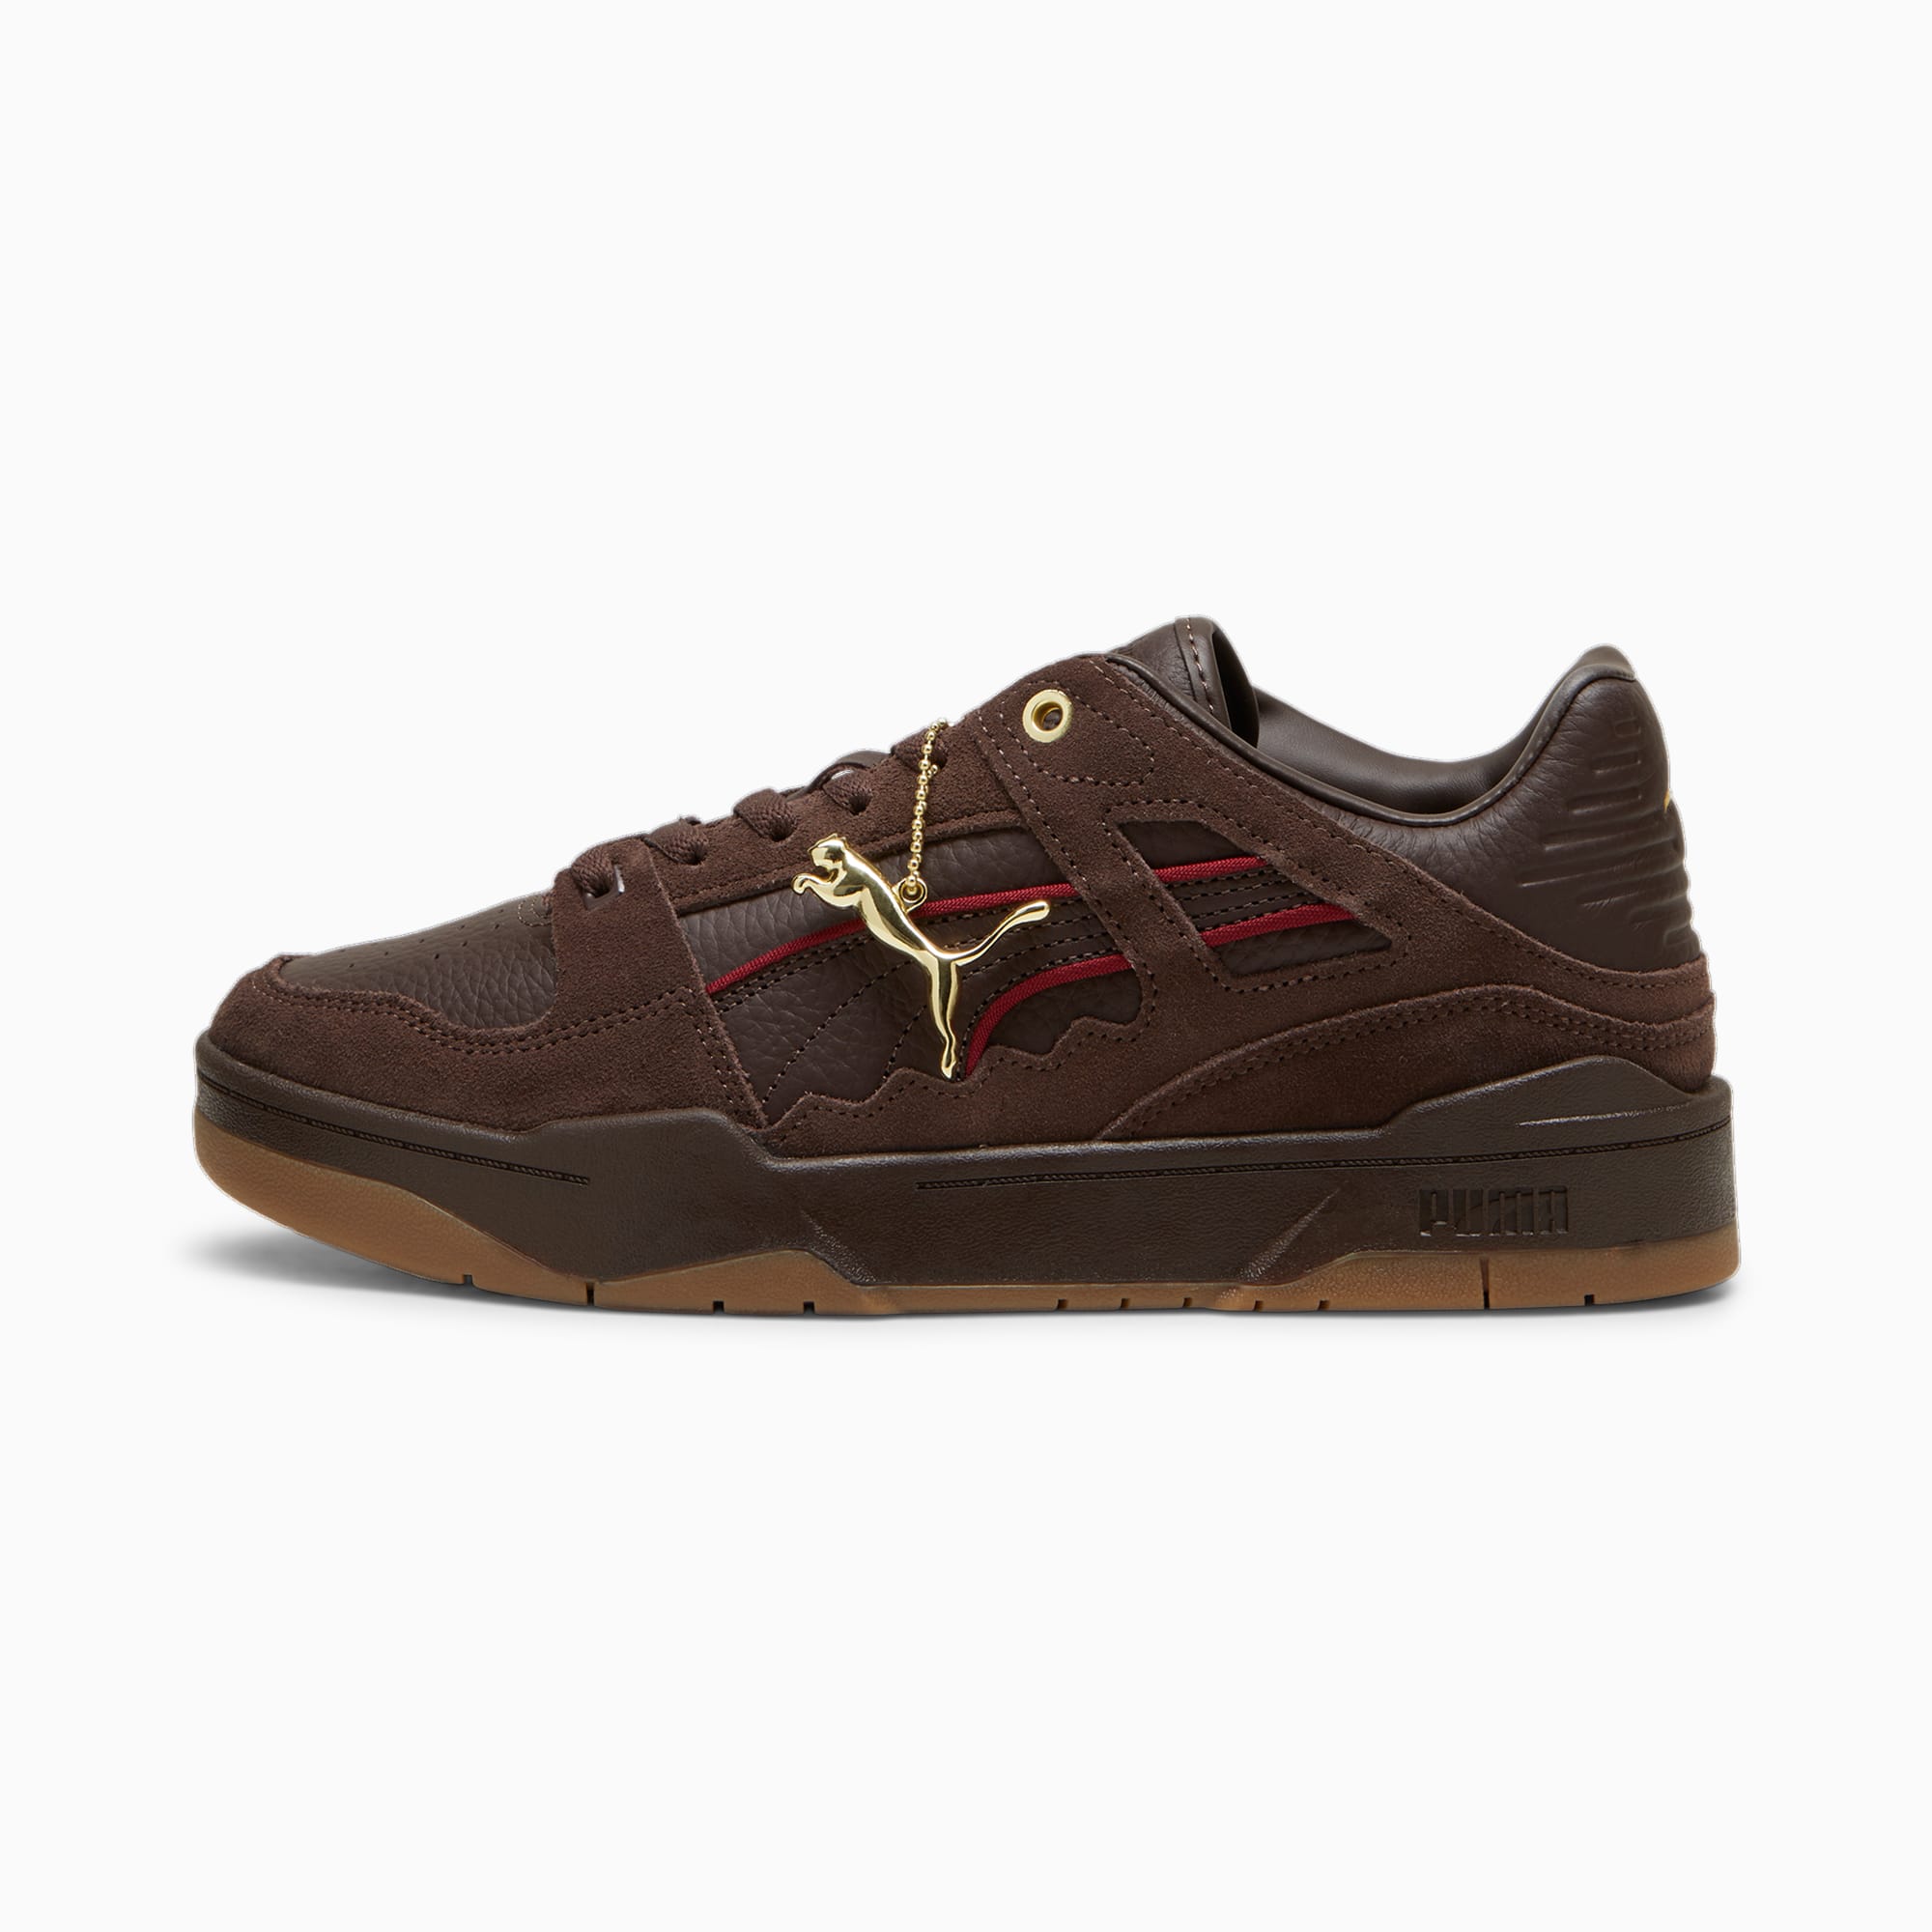 Chaussure Sneakers Slipstream PUMA X STAPLE Pour Homme, Marron